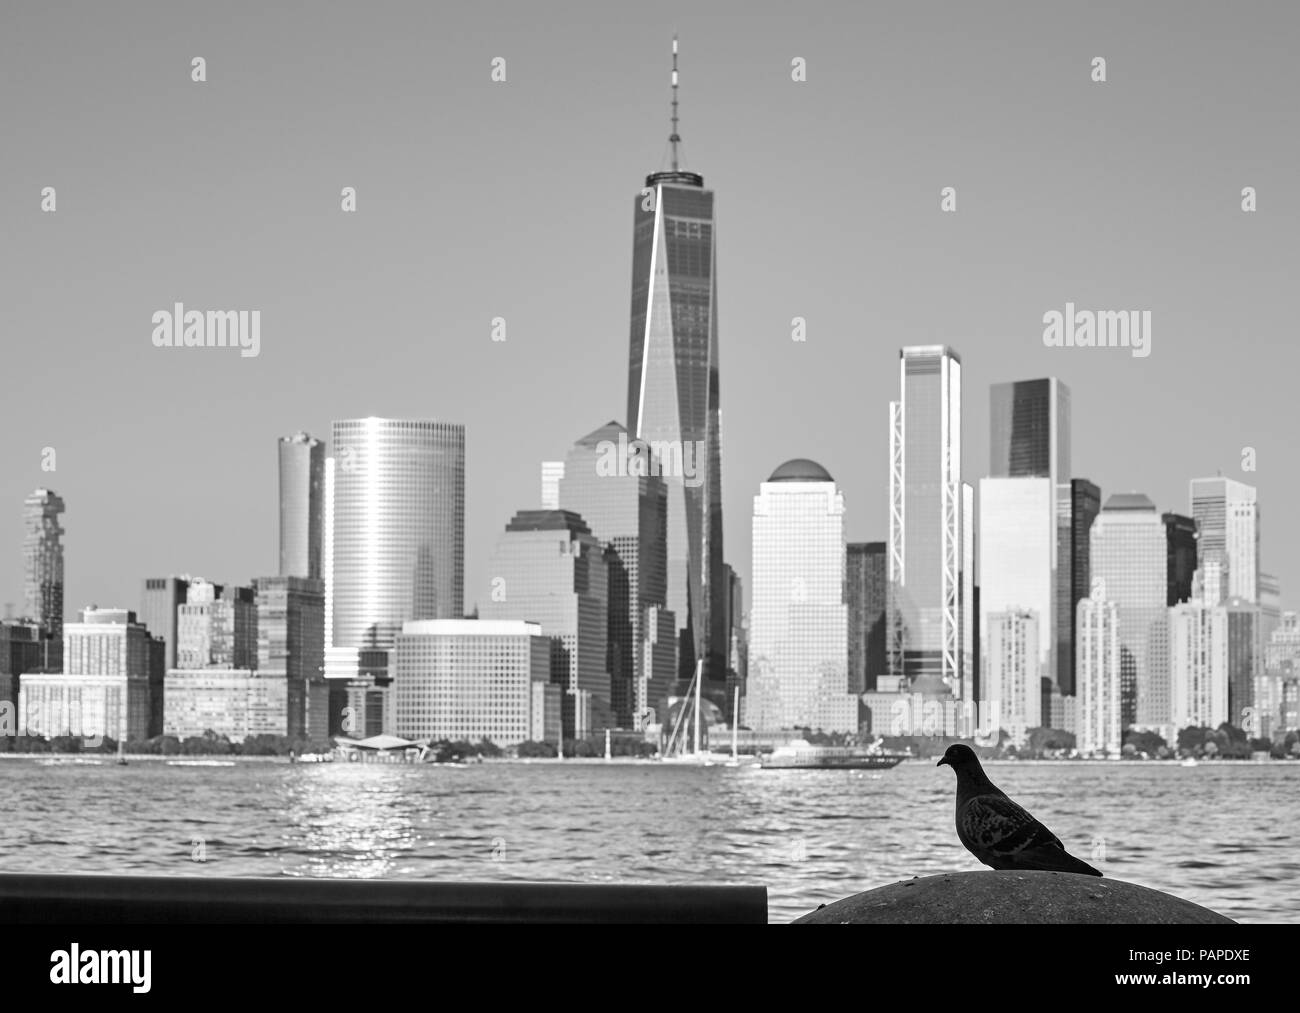 Black And White Picture Of A Pigeon Silhouette With Blurred